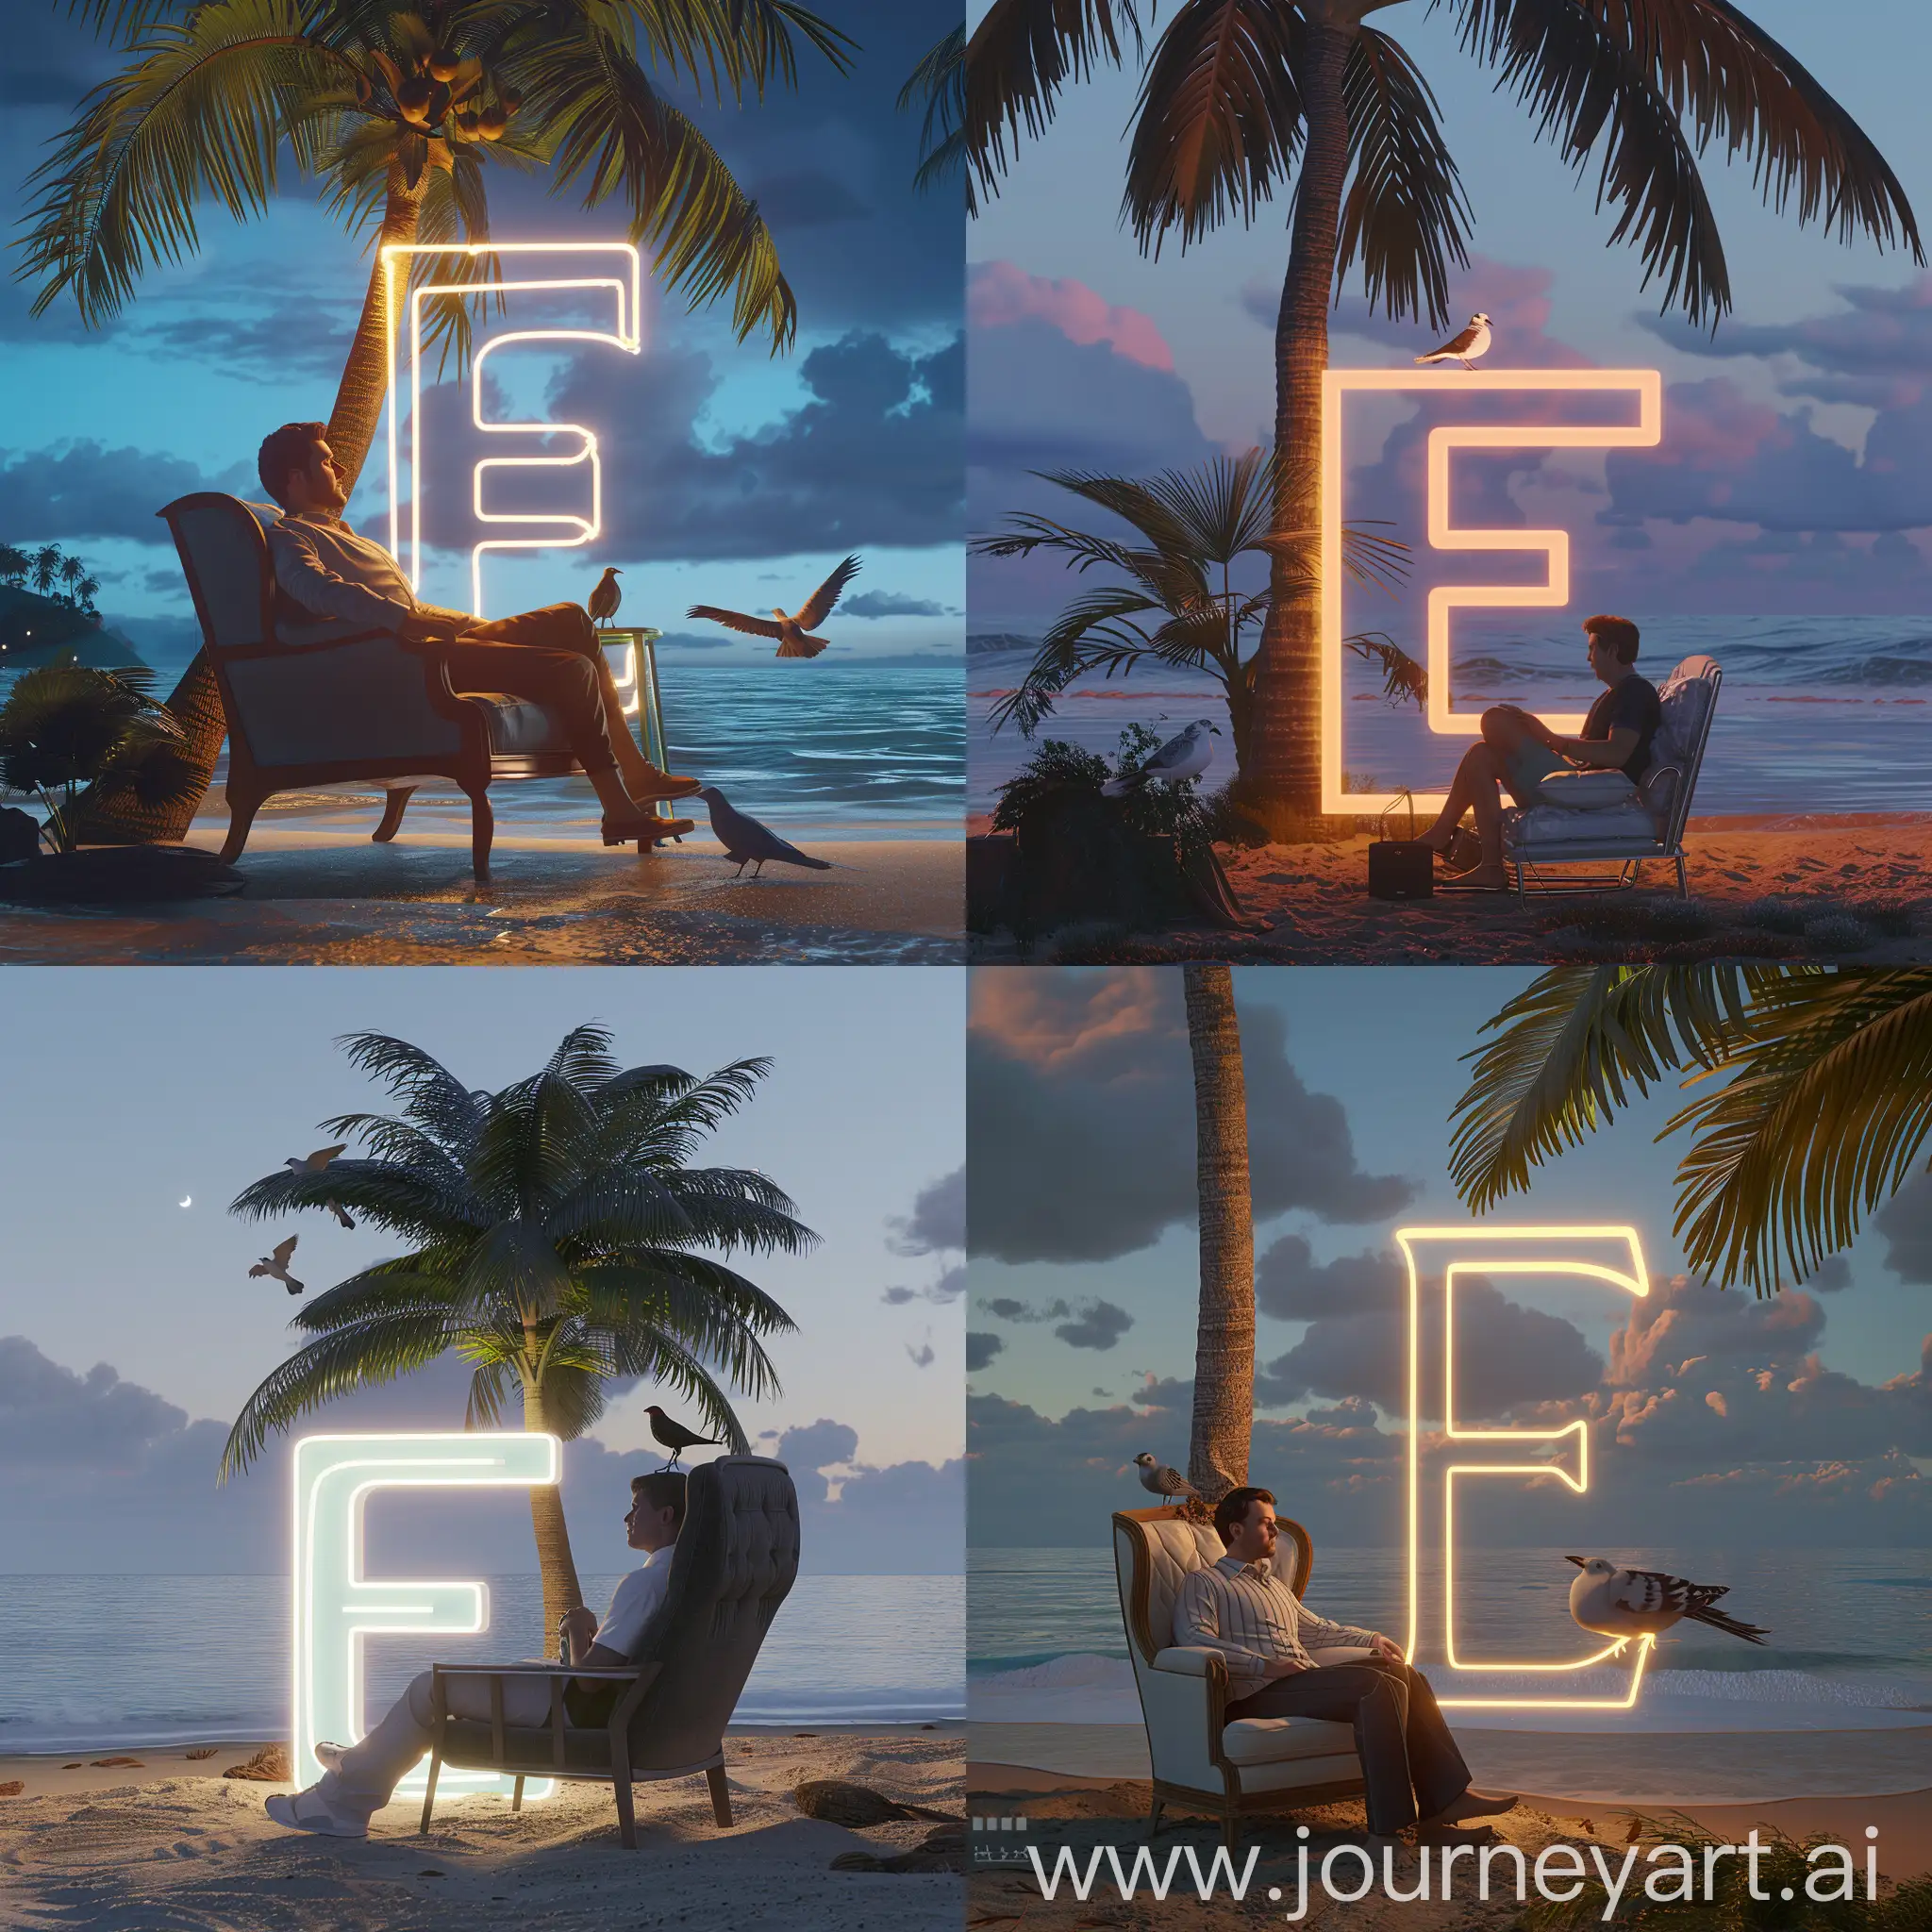 a man sitting in an armchair under a palm tree on the beach, with a bird sitting on top of a chair, 3D rendering, the white letter "E" glows with neon verdadism, vray rendering, Chris Labroy